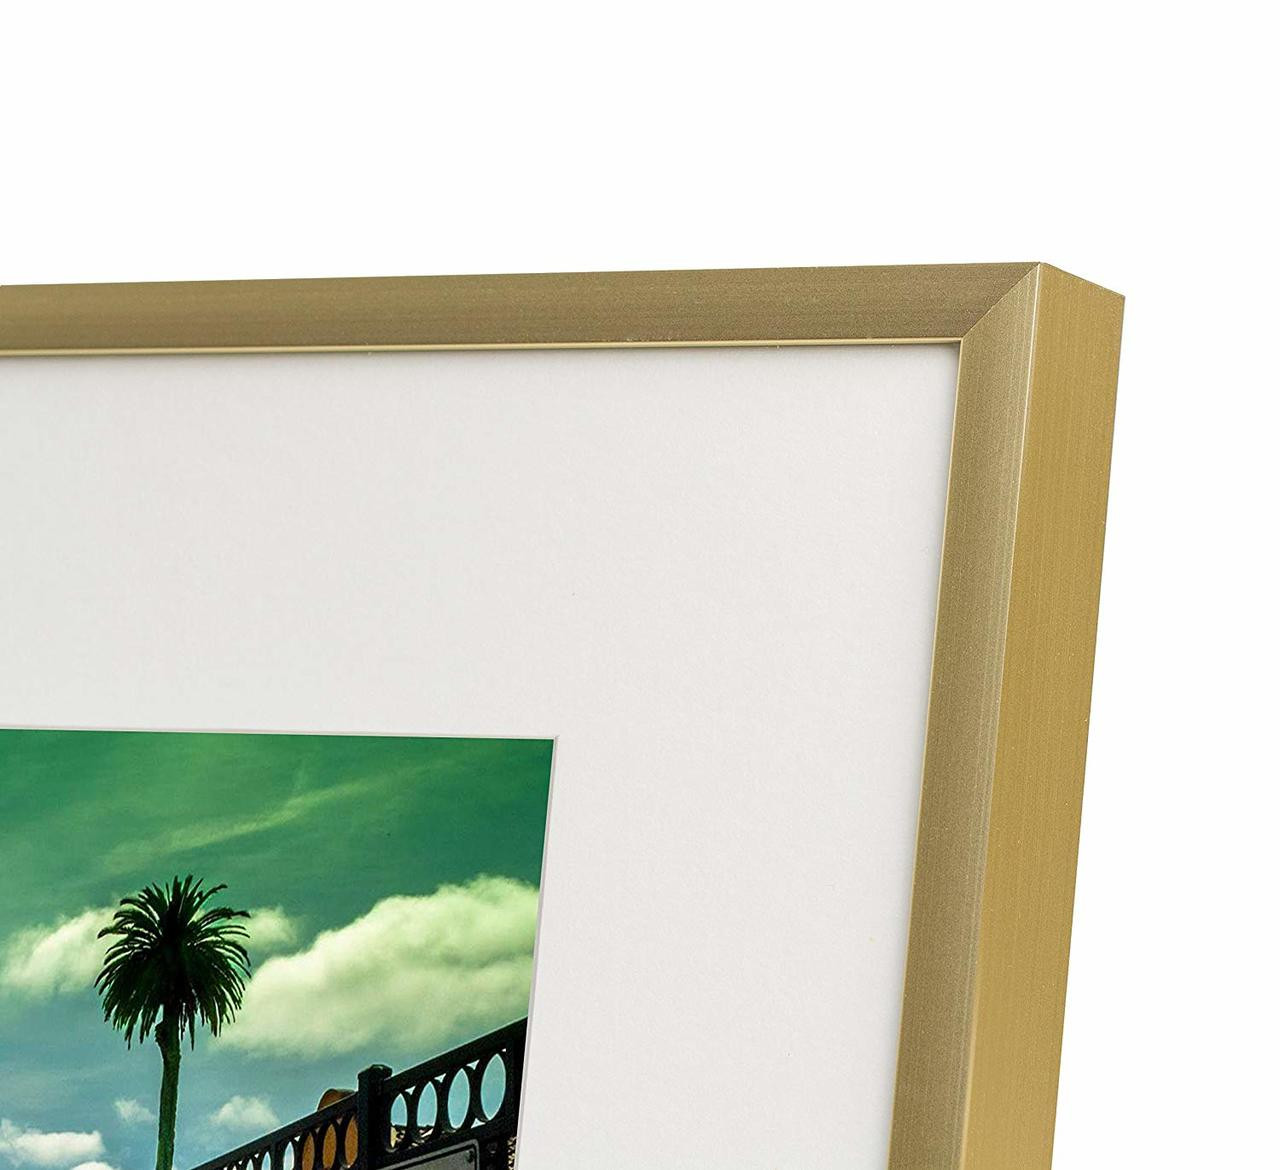 Mat Board Center, 8x10 Aluminum Picture Frame - Displays 5x7 with Mat and  8x10 Without Mat - Horizontal and Vertical for Tabletop Wall Mounting Metal